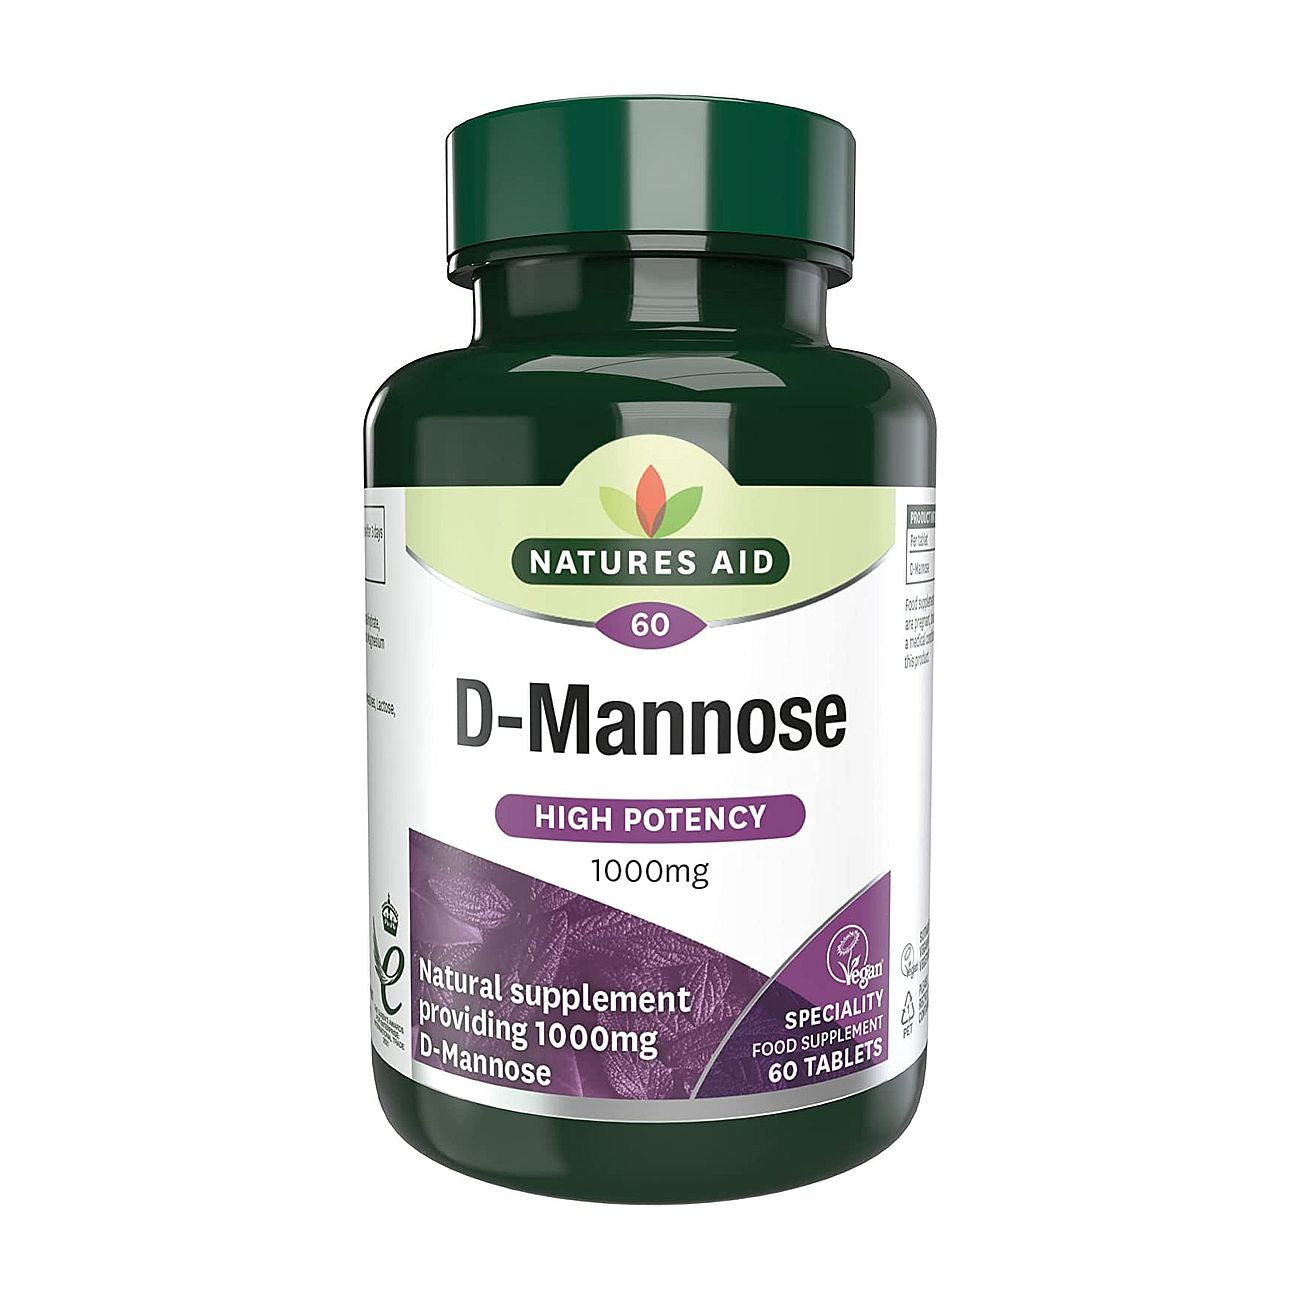 D-Mannose 1000mg 60 Tablets